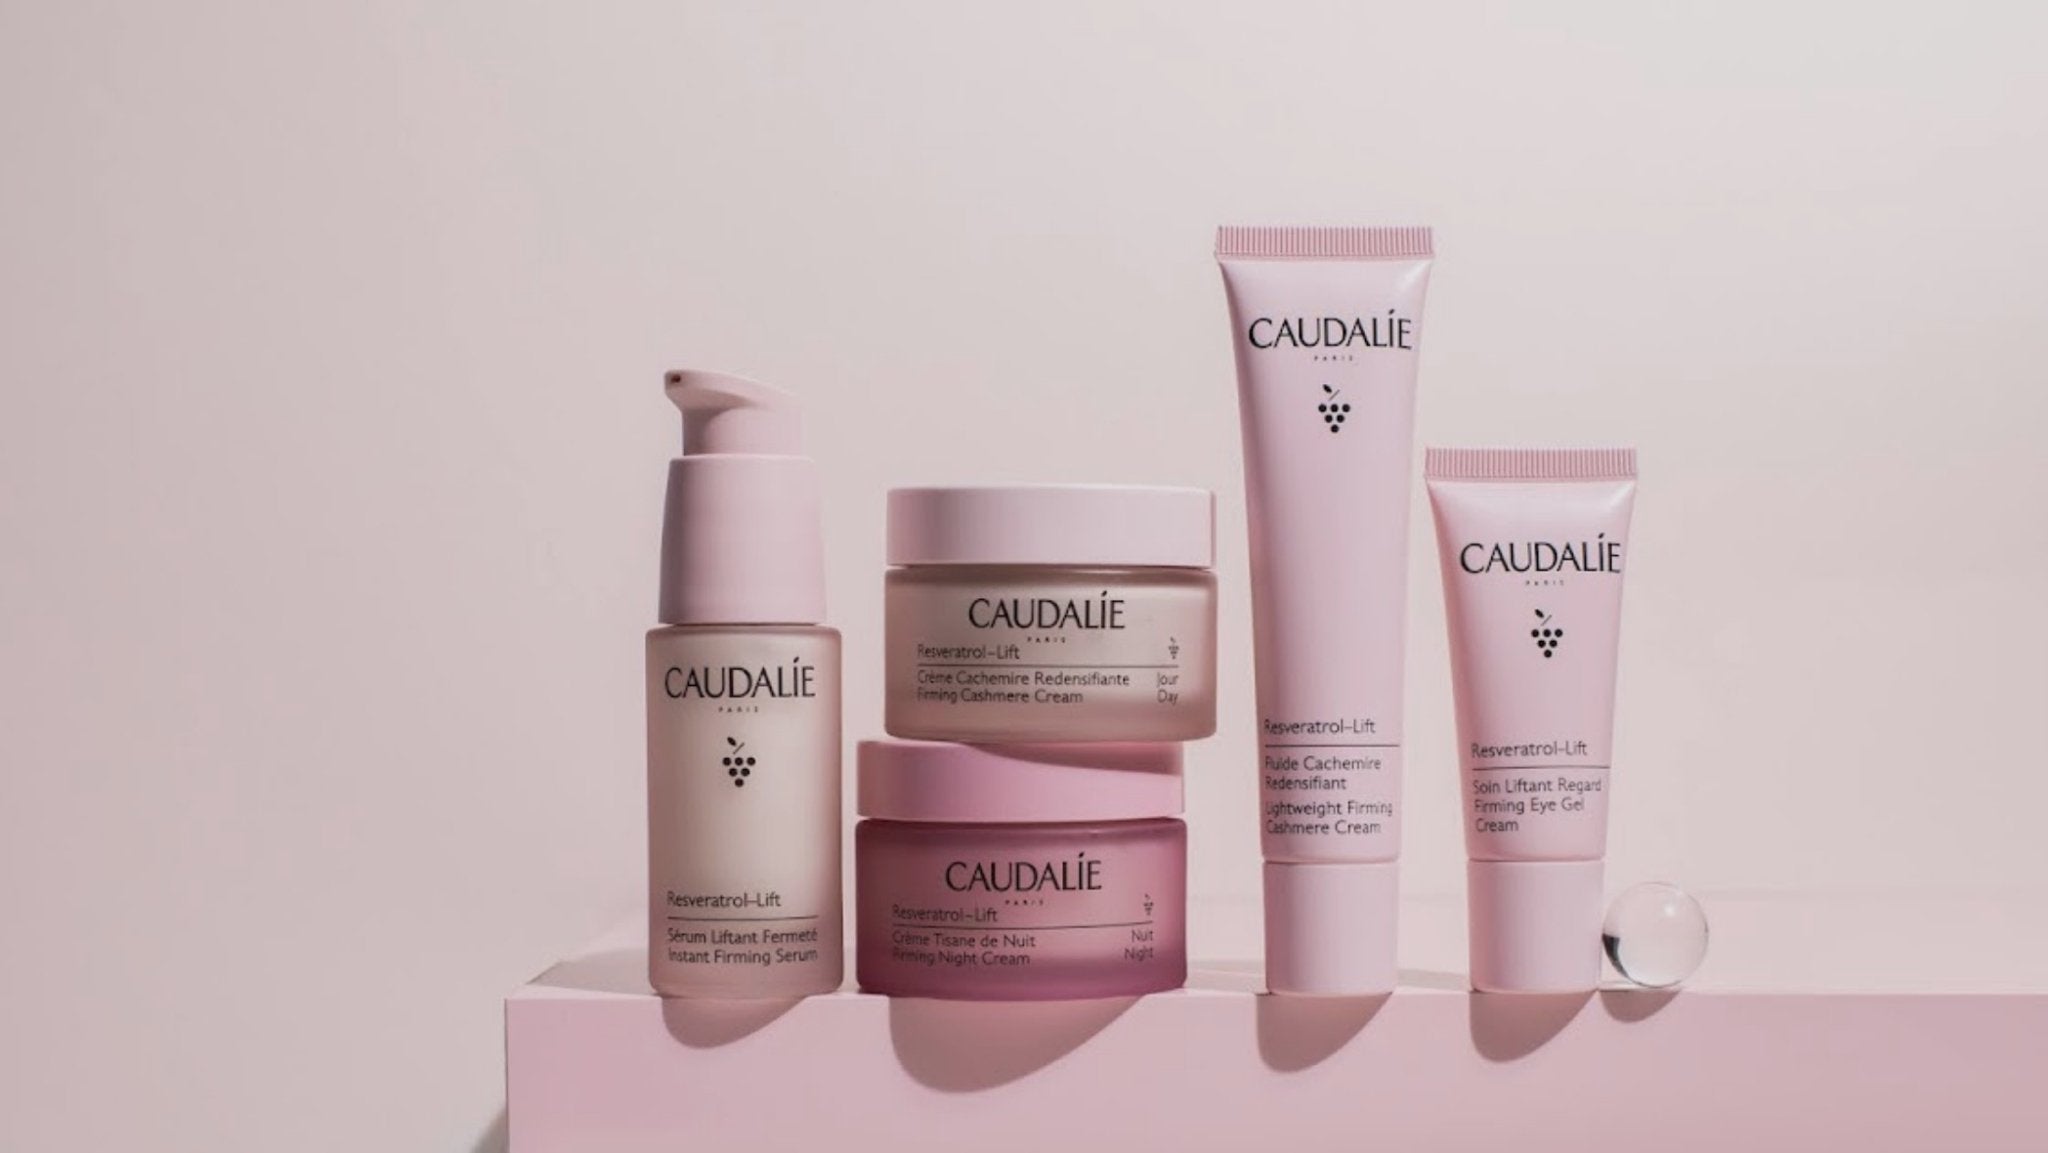 Caudalie or the age defying properties of grapes - French Beauty Co.